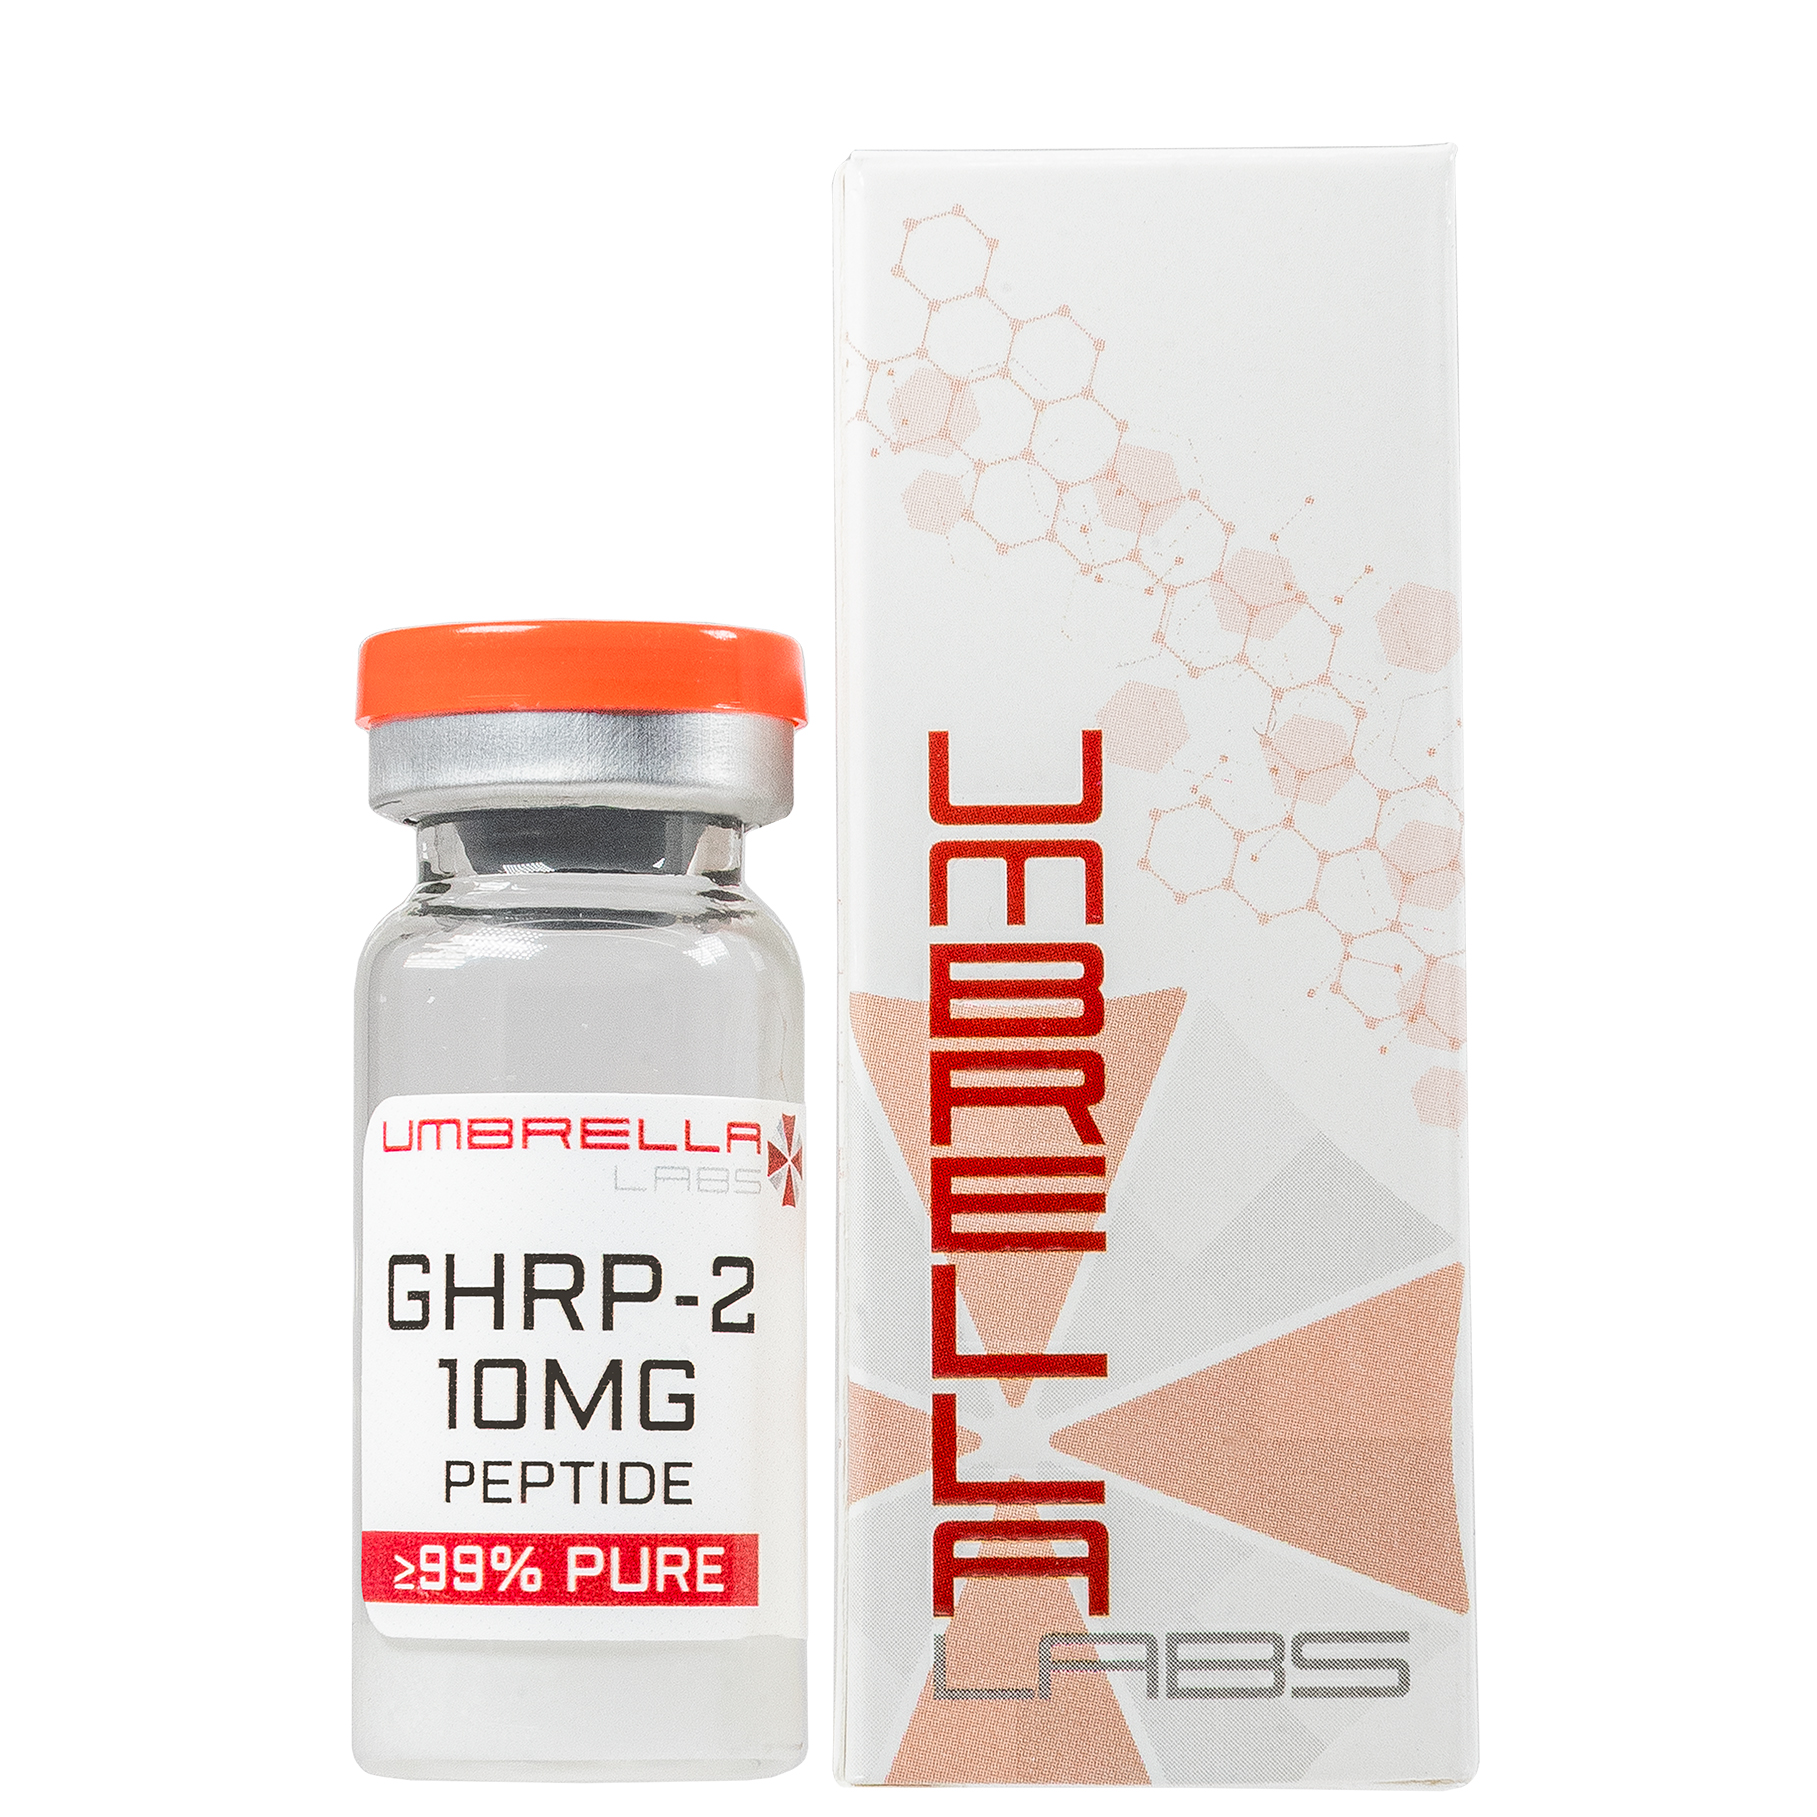 ghrp 2 peptide benefits